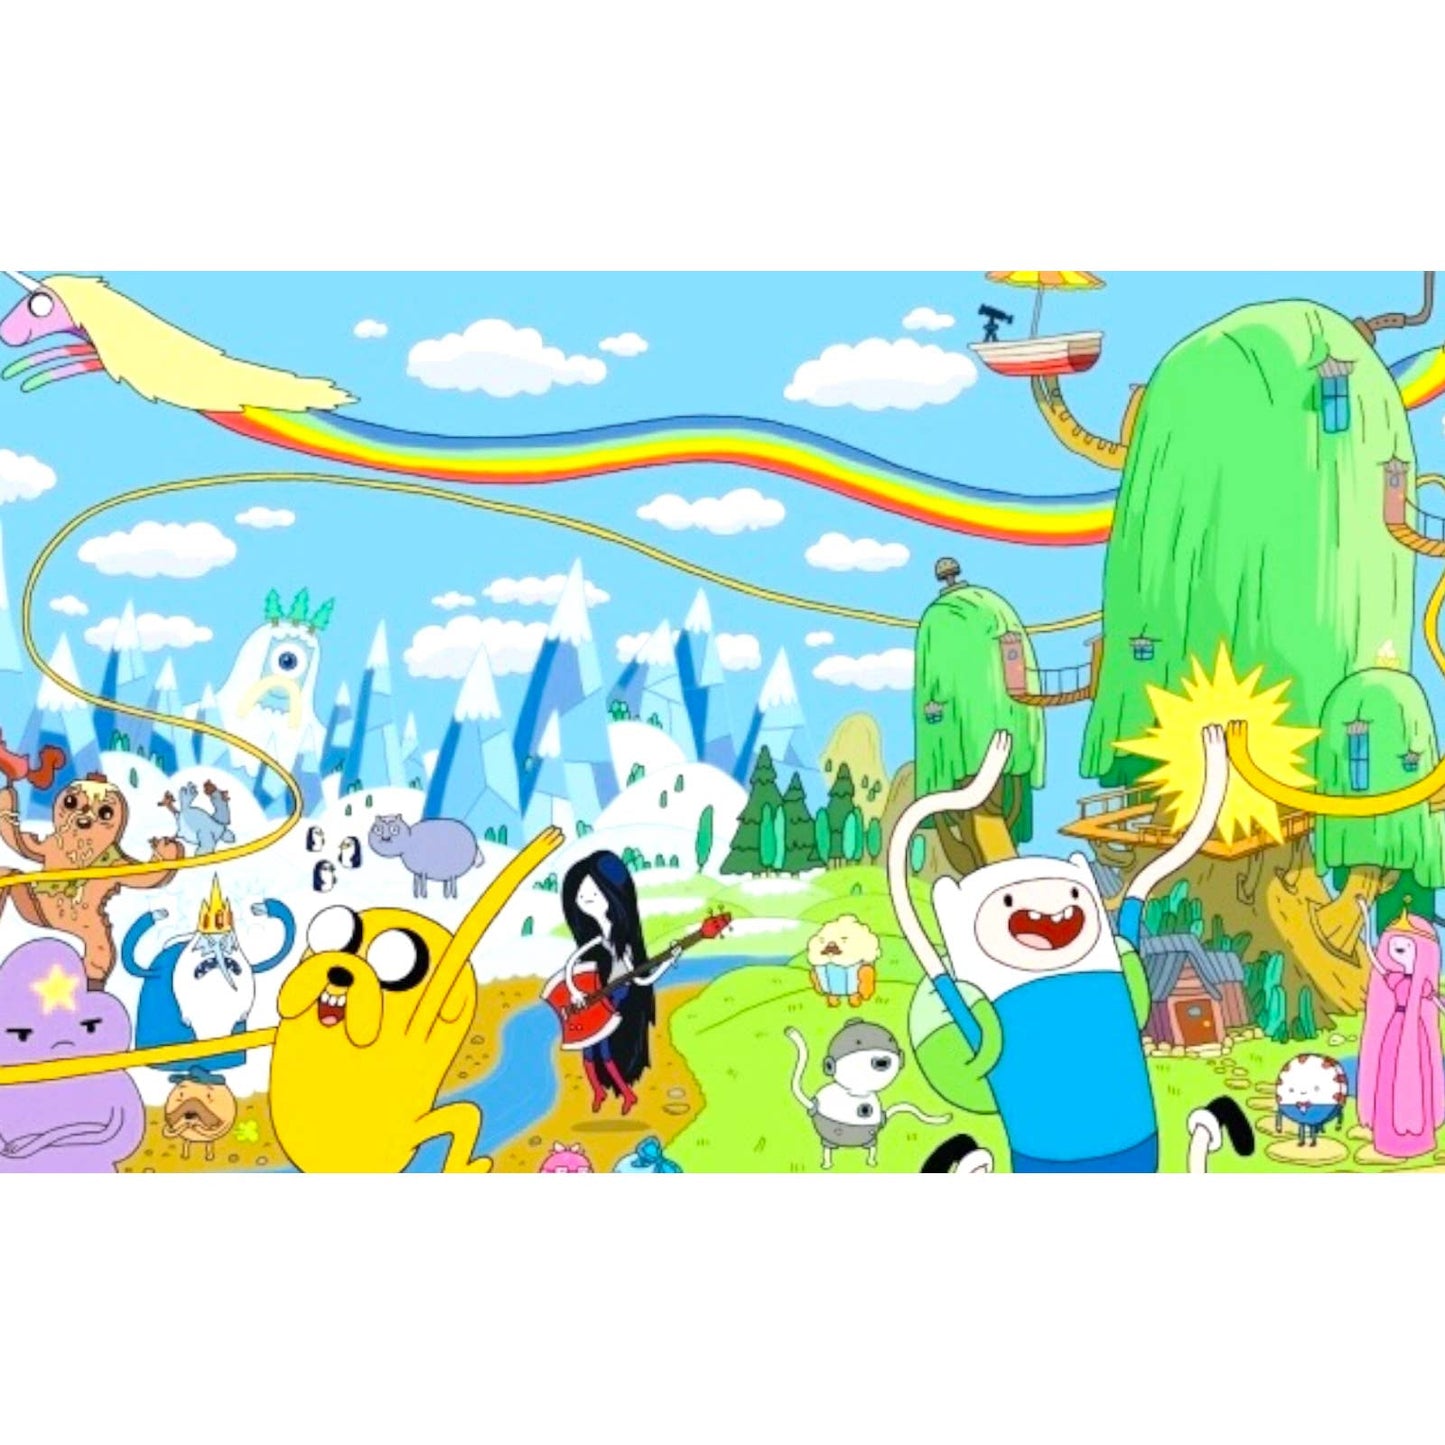 36" x 60" Adventure Time Tapestry Wall Hanging Décor